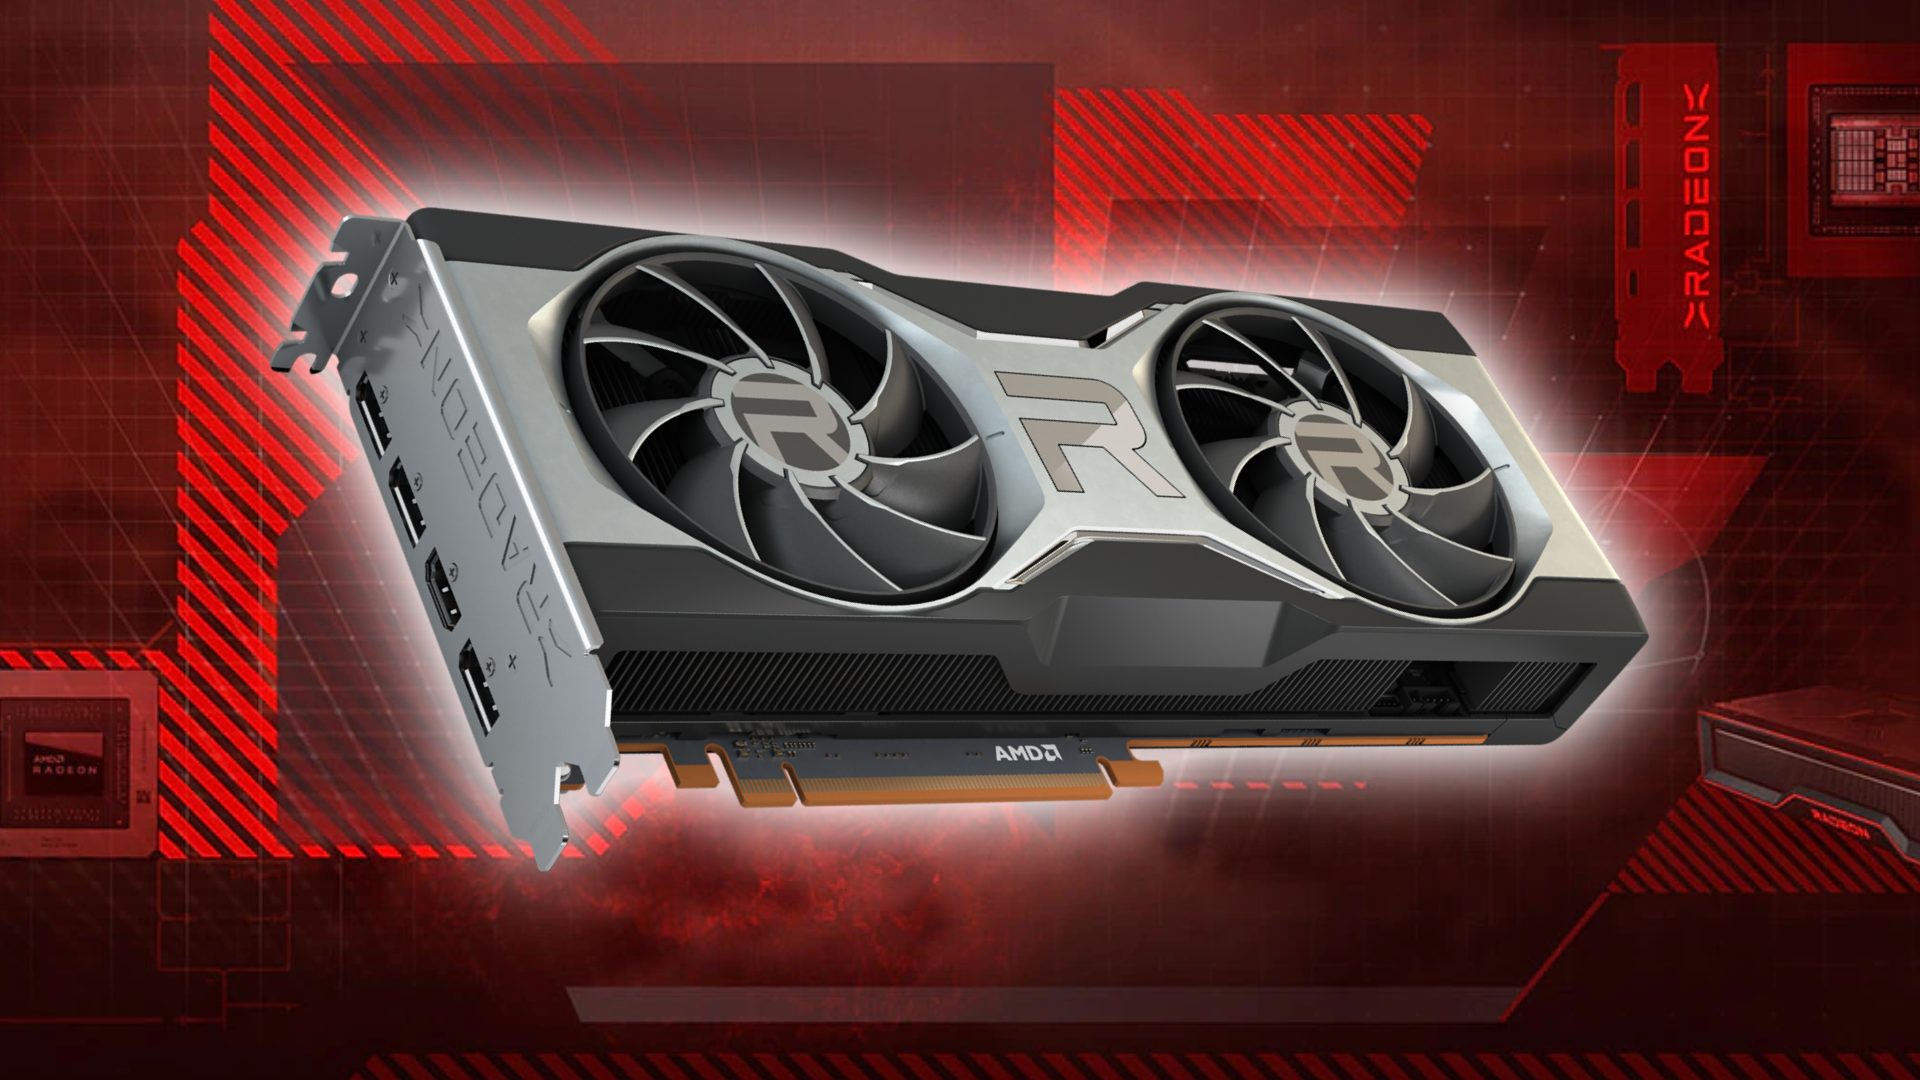 AMD Radeon RX 7900 XT: RDNA 2 graphics card with red branding background